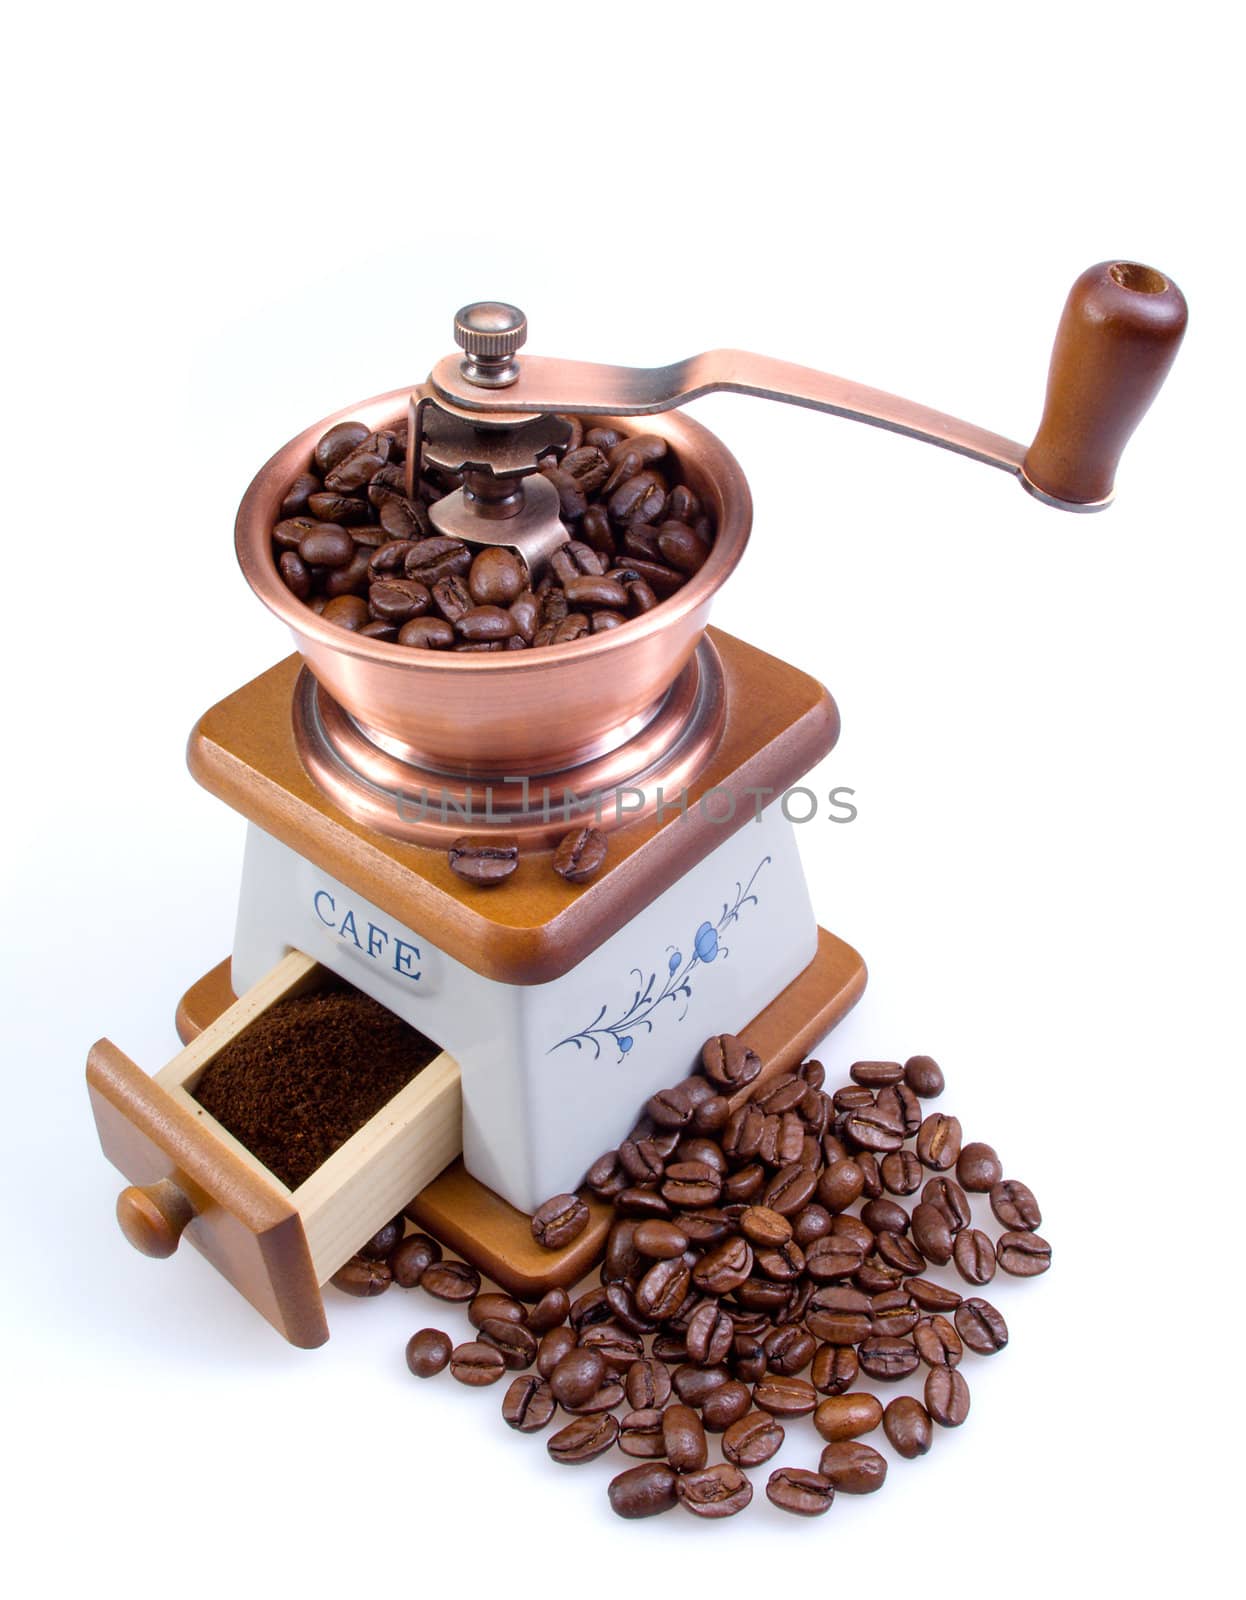 Old coffee grinder with coffee grains